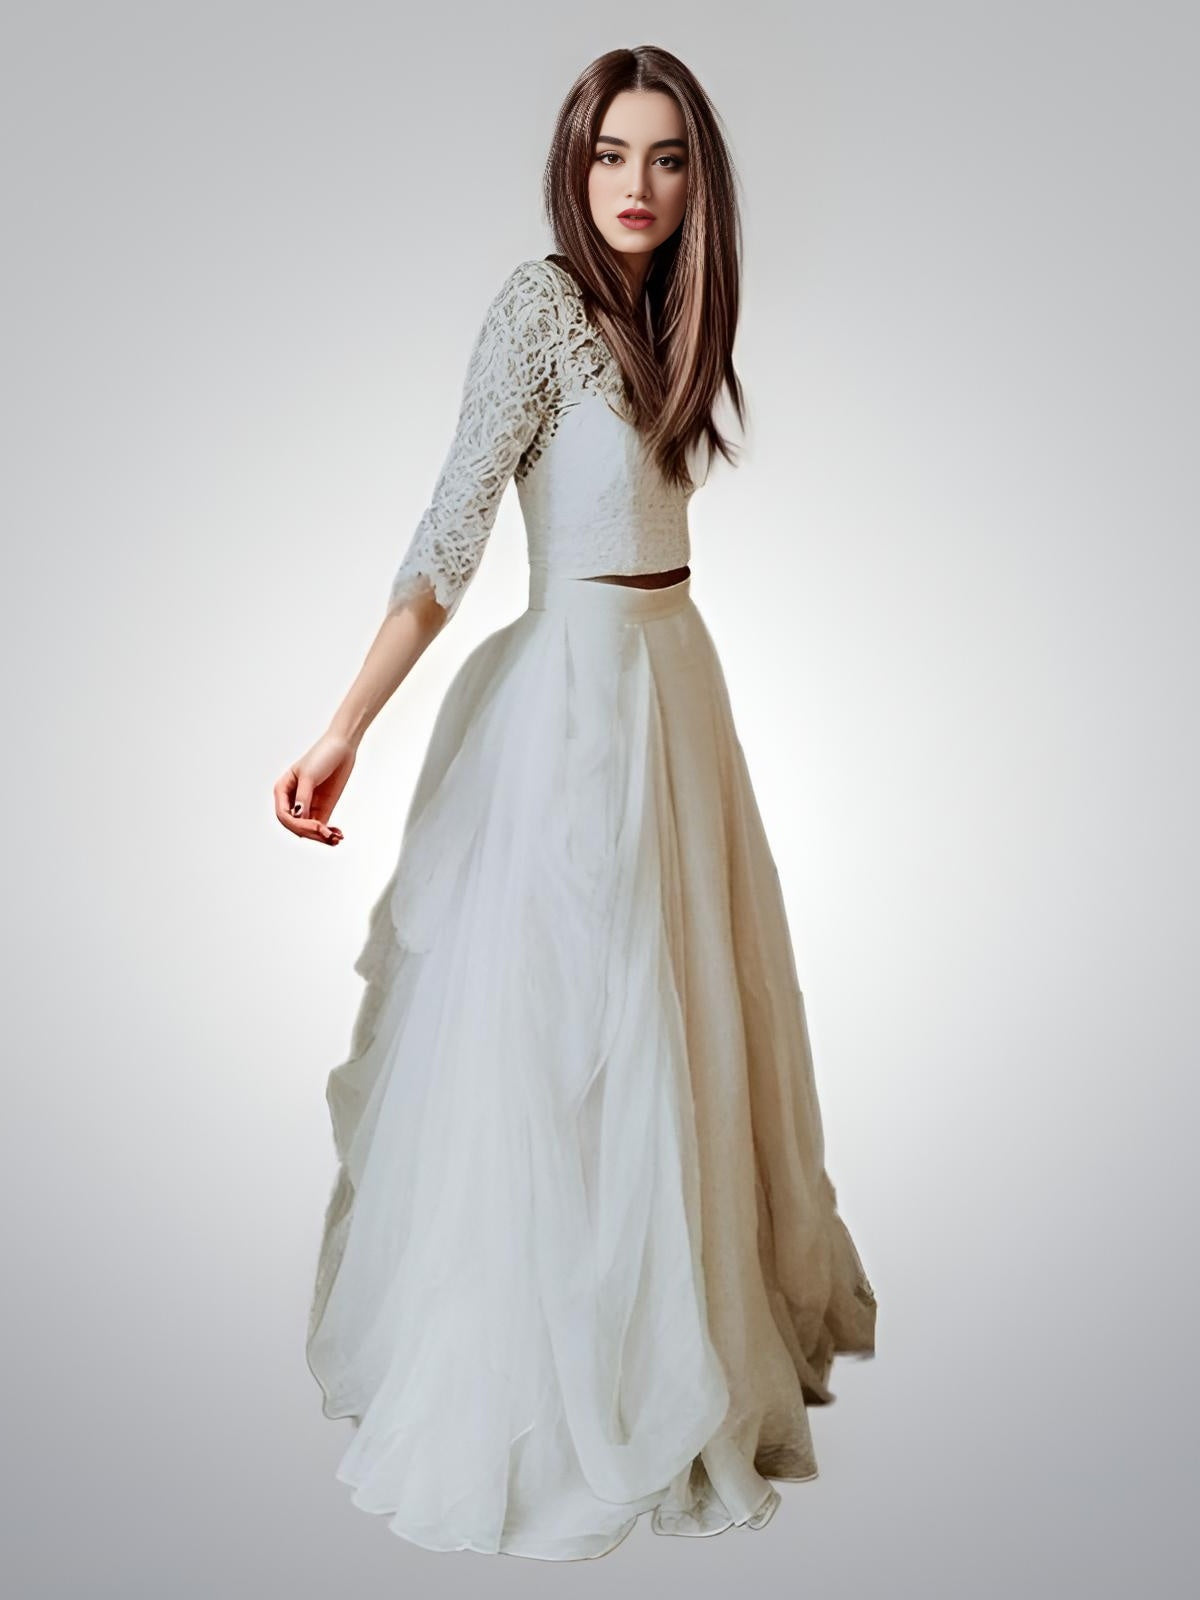 Bride wearing heavy layered Chiffon Skirt Wedding Dress and full lace bridal top with 3/4 sleeves